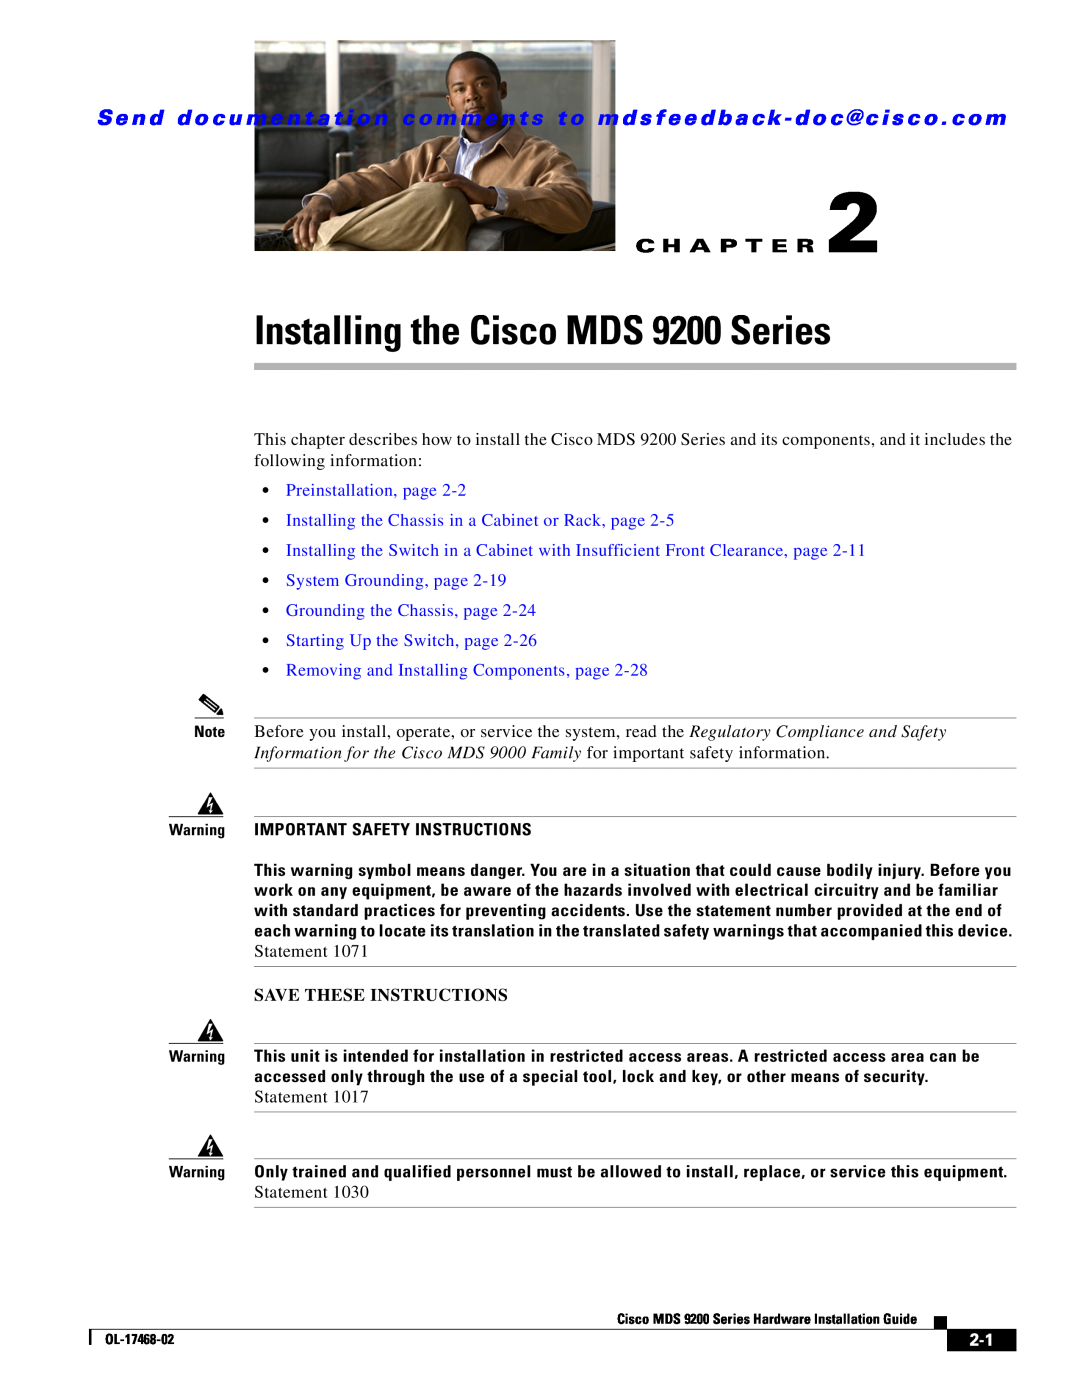 Cisco Systems manual Installing the Cisco MDS 9200 Series, Preinstallation, page, Save These Instructions, C H A P T E R 